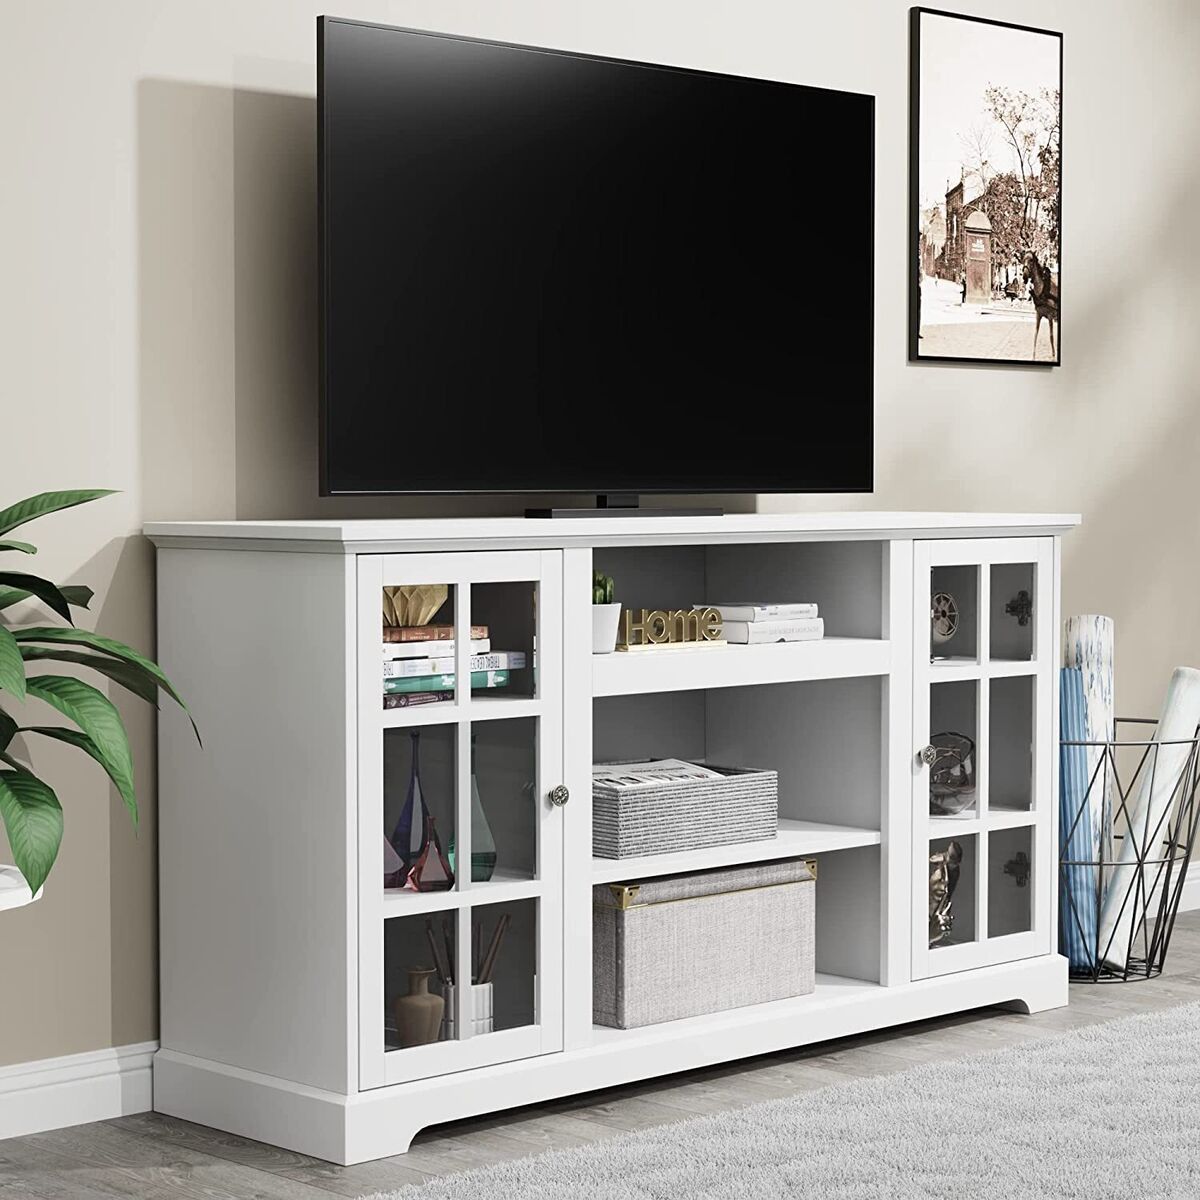 Modern Farmhouse Tv Stand For 65 Inch Tv Entertainment Center Storage  Cabinets | Ebay Within Farmhouse Stands With Shelves (View 4 of 15)